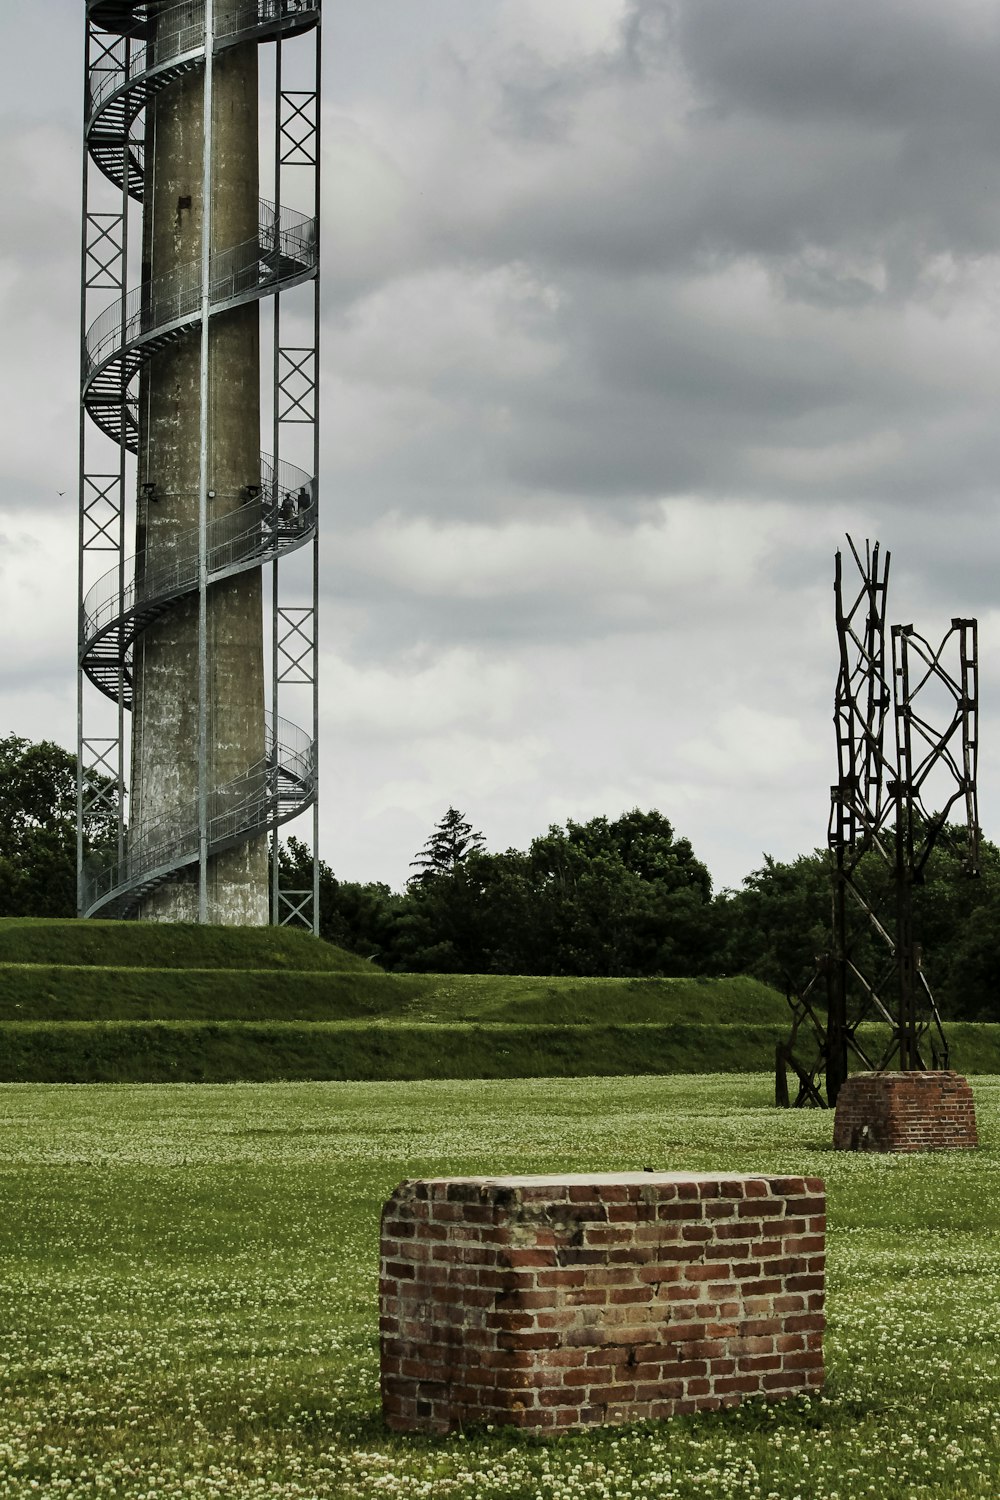 a tall tower next to a brick wall in a field